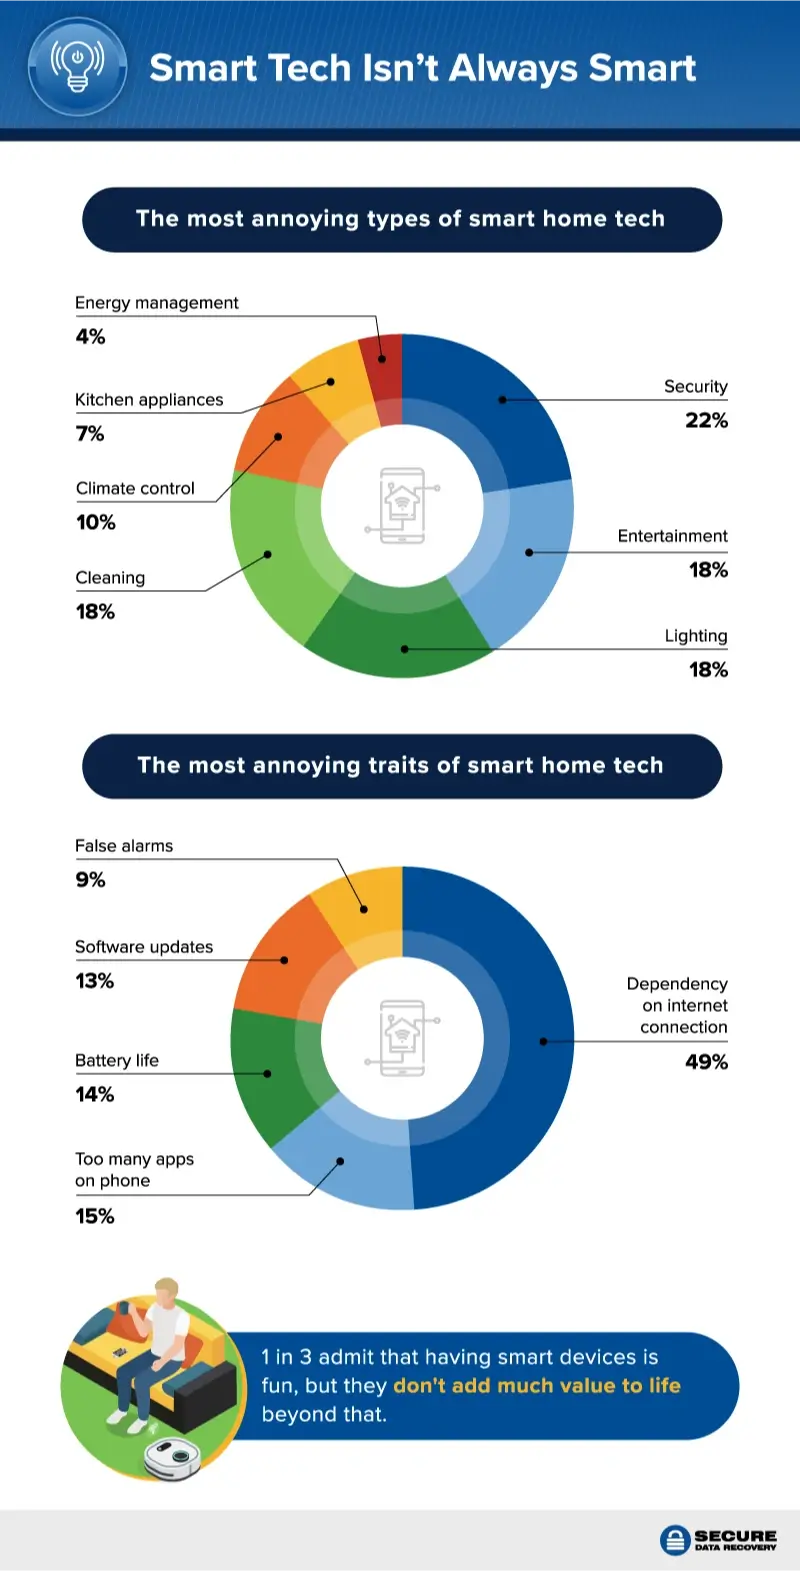 An infographic showing the most annoying types and traits of smart home technology.